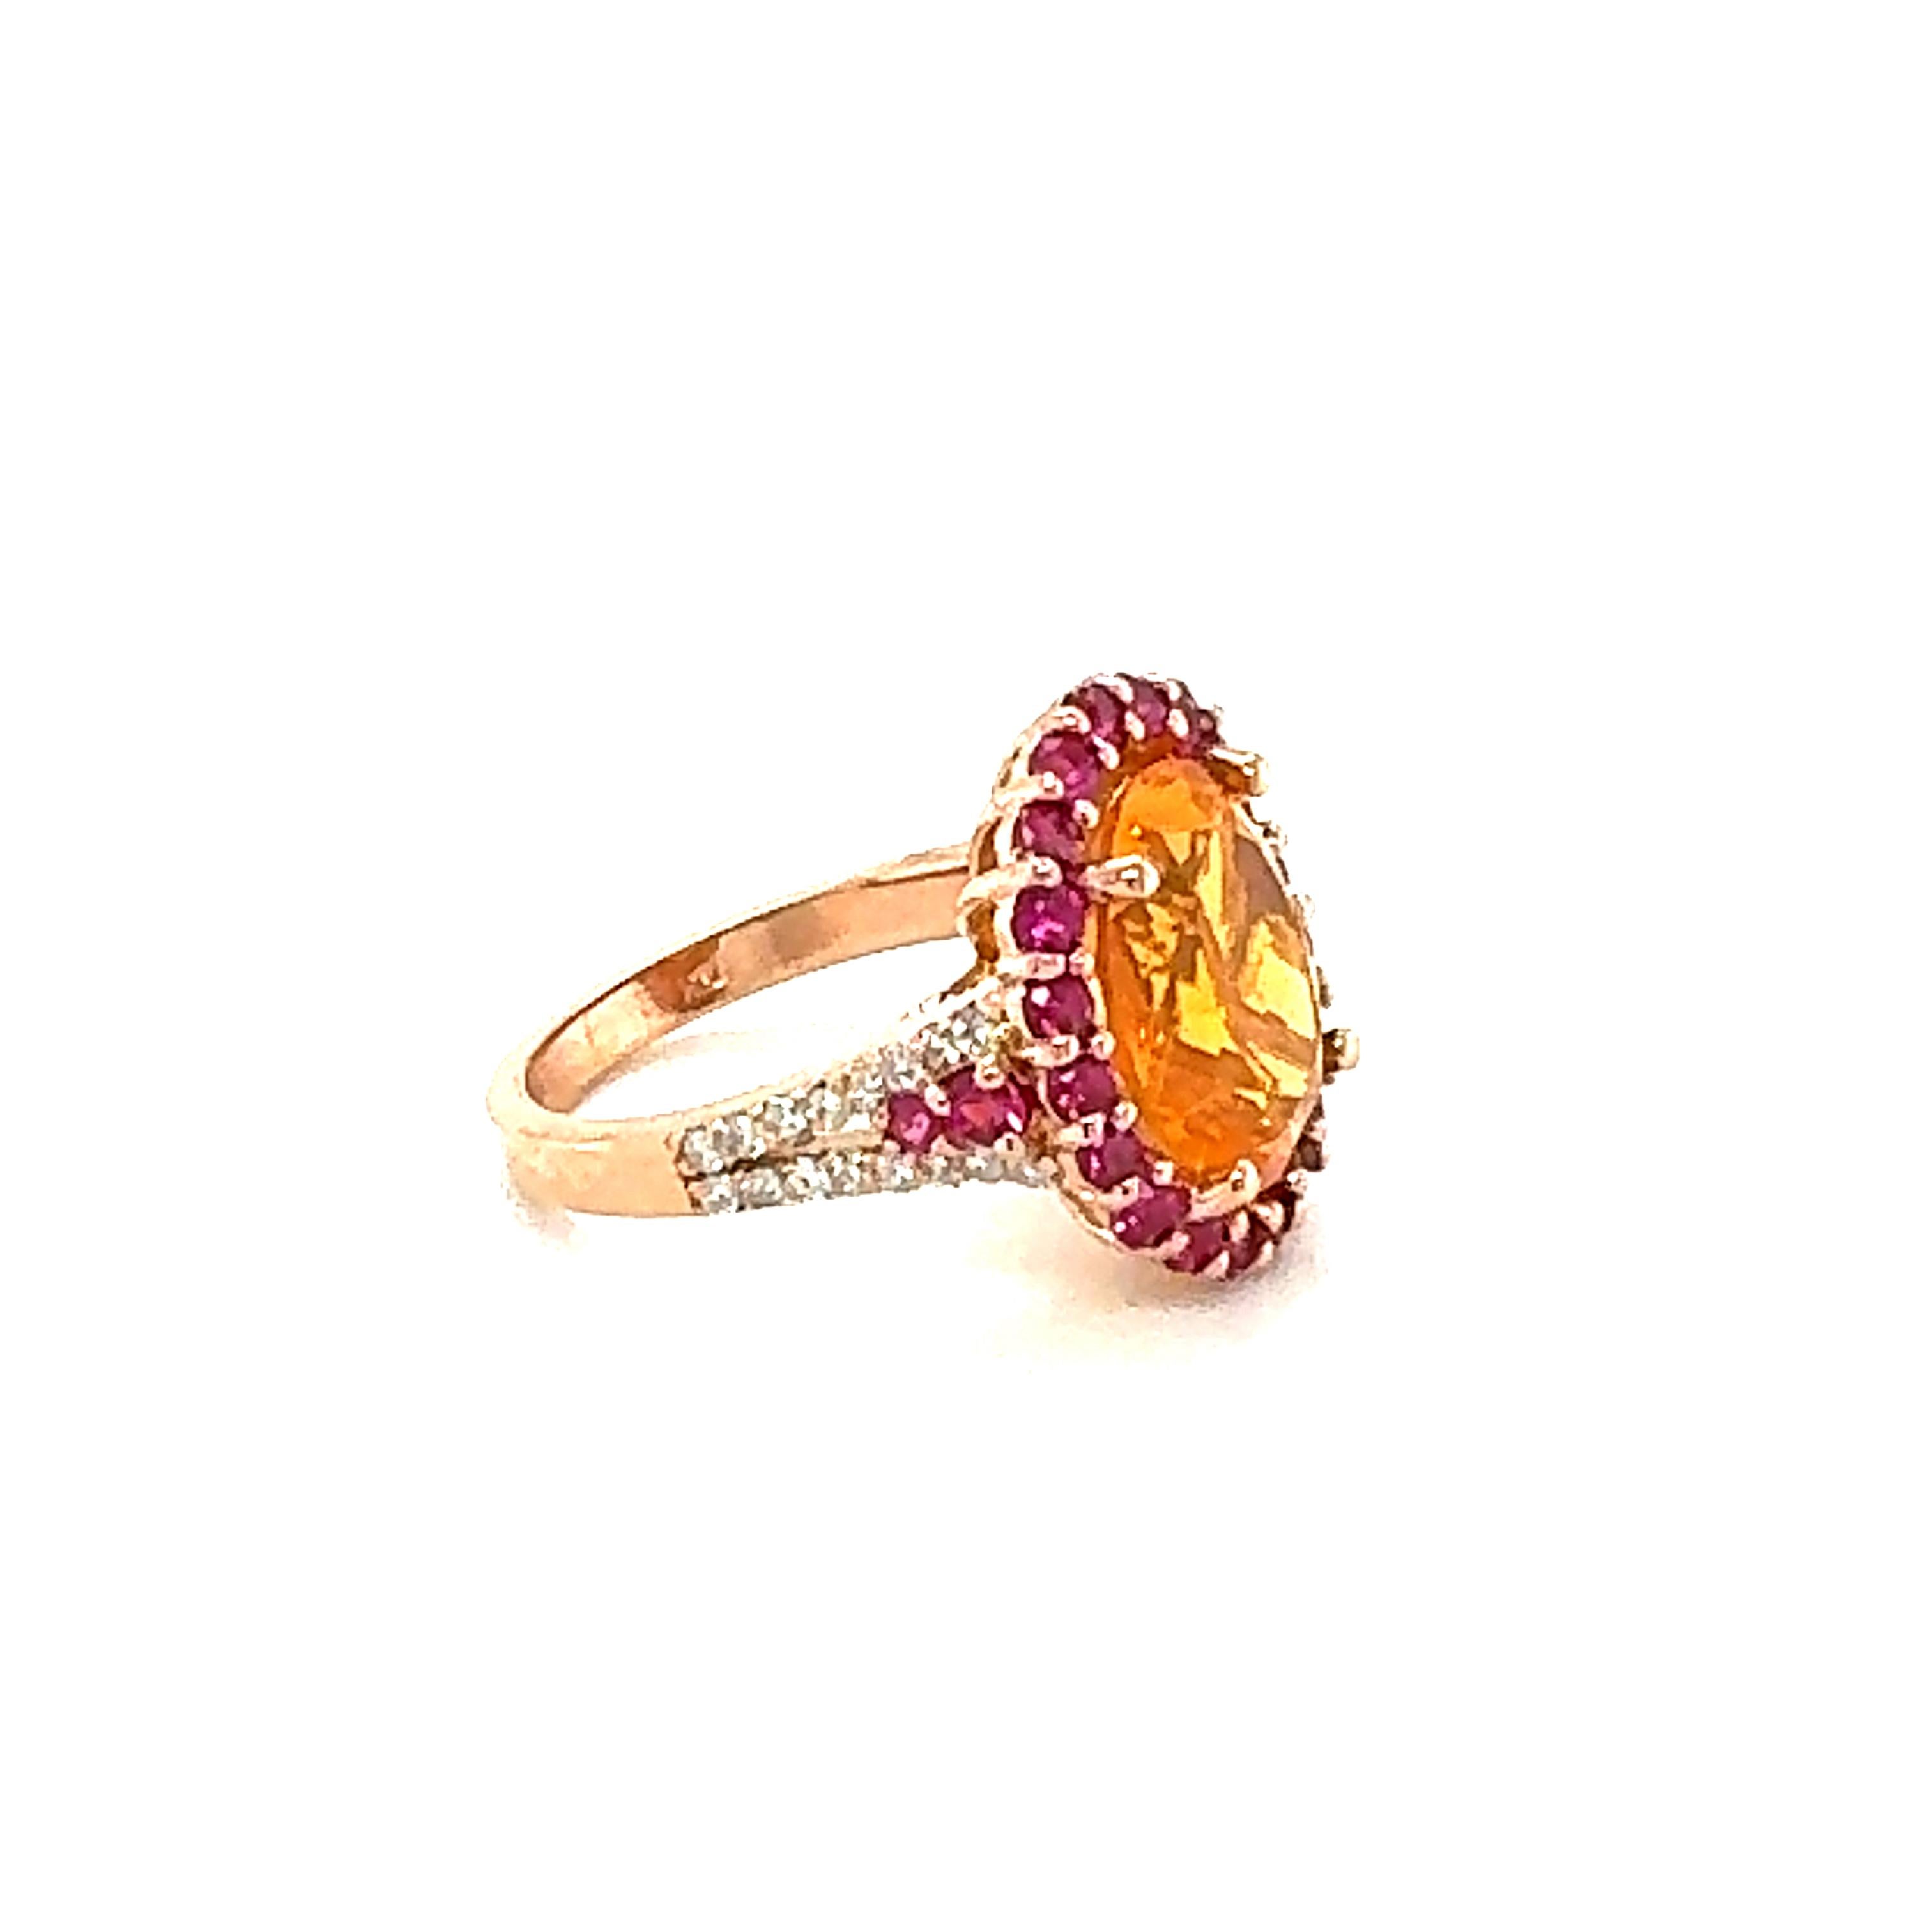 Contemporary 5.27 Carat Oval Cut Fire Opal Sapphire Diamond Rose Gold Cocktail Ring For Sale